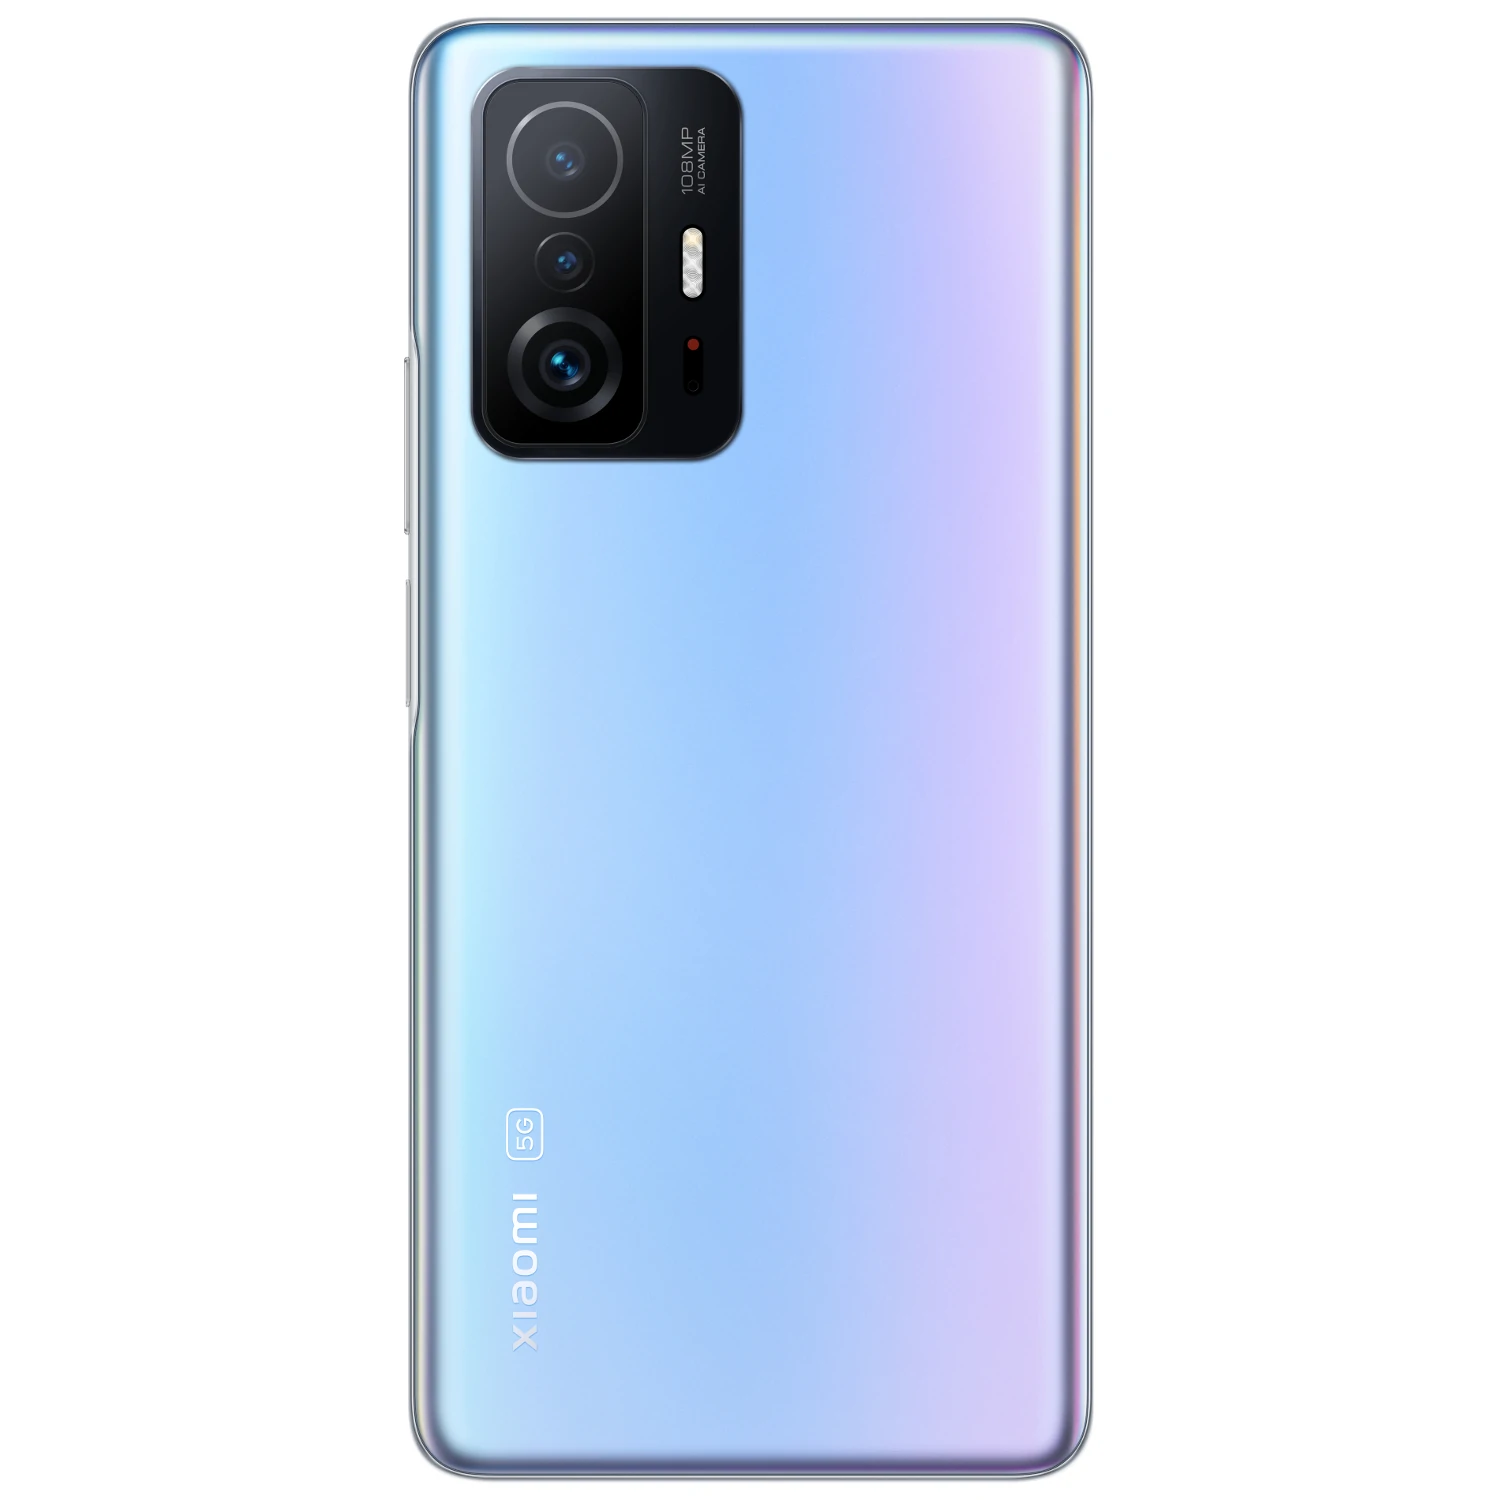 Find Xiaomi 11T Pro Global Version 120W Fast Charge 108MP Triple Camera 12GB 256GB Snapdragon 888 6 67 inch 120Hz AMOLED NFC Octa Core 5G Smartphone for Sale on Gipsybee.com